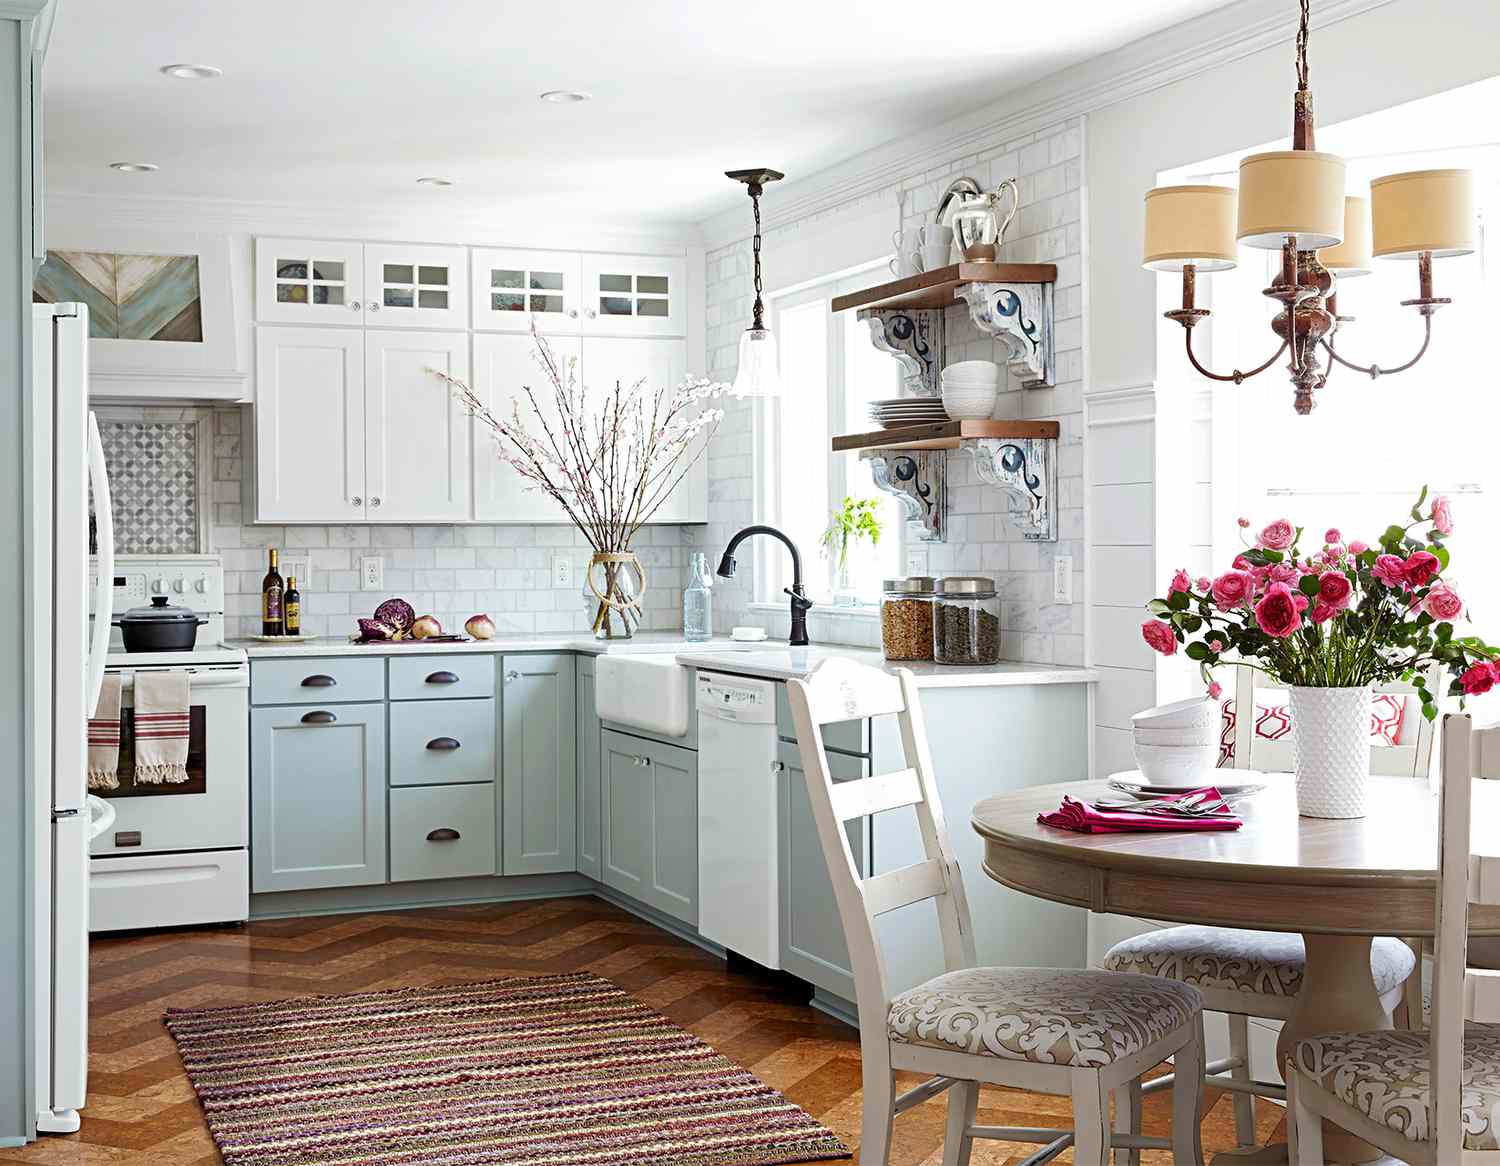 Creatice How To Make Small Kitchen Feel Bigger for Small Space